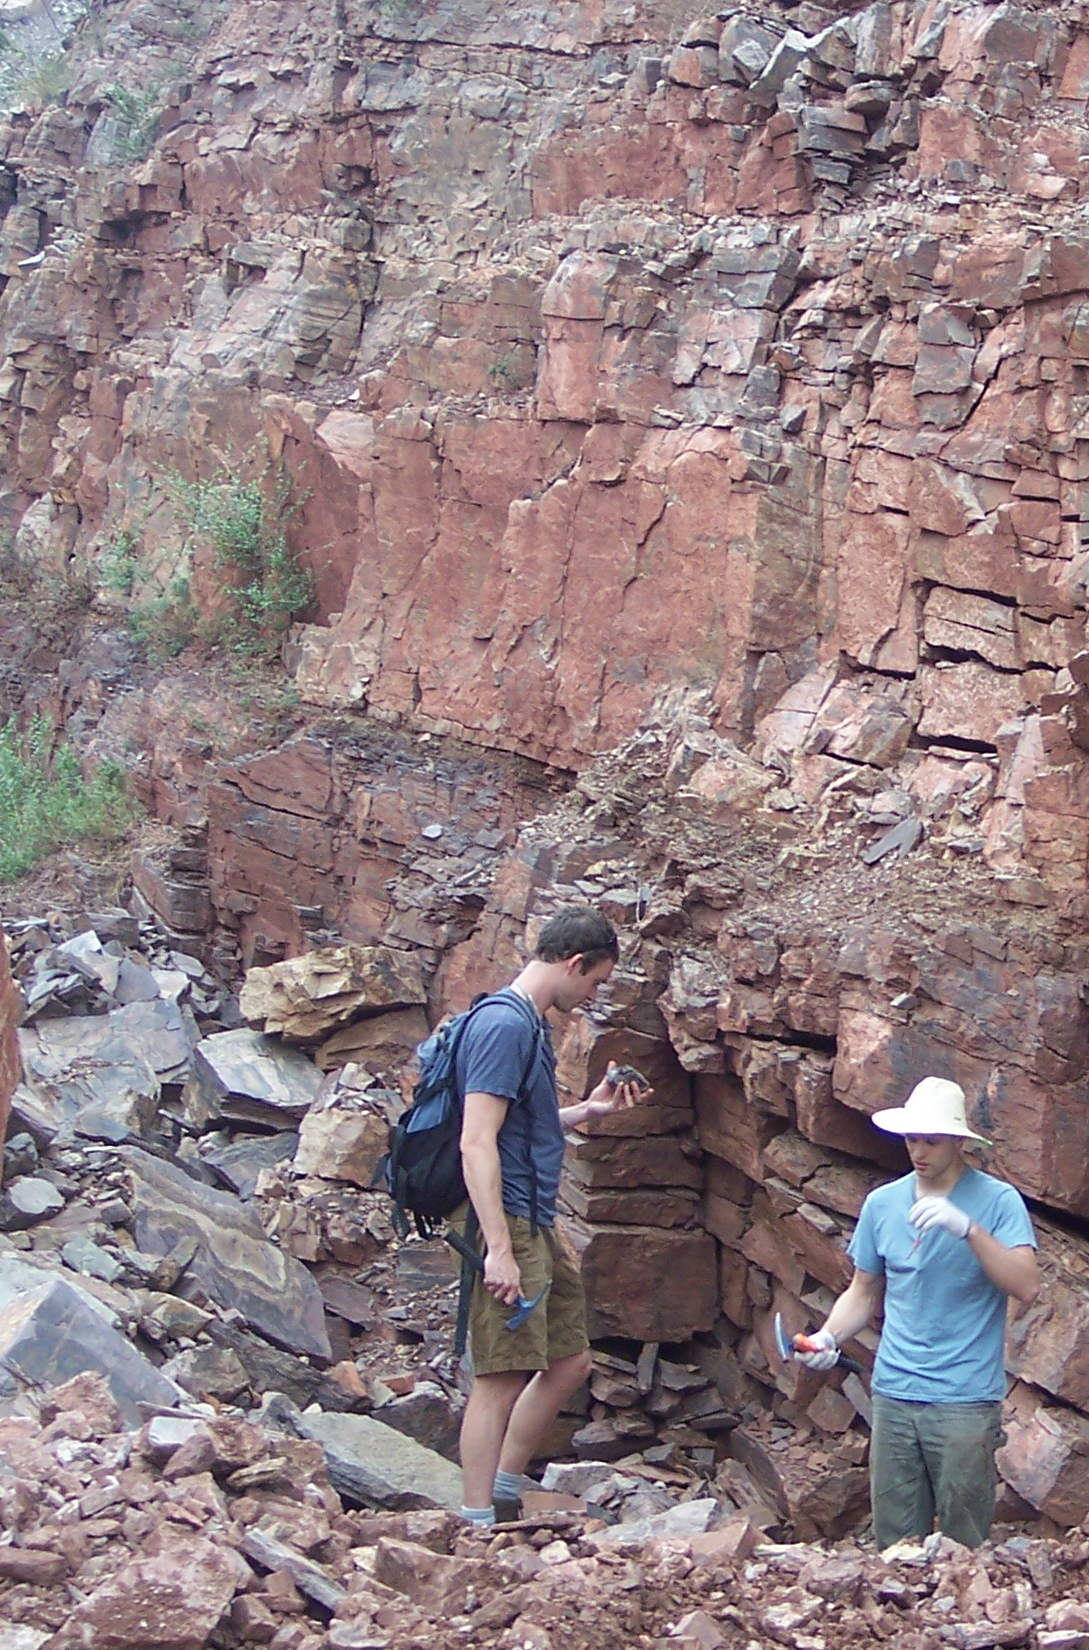 Reinhard (left) and Planavsky (right) sample marine sedimentary rocks deposited billions of years ago that provide a window into the Earth's evolution. Credit: Georgia Tech / Reinhard lab